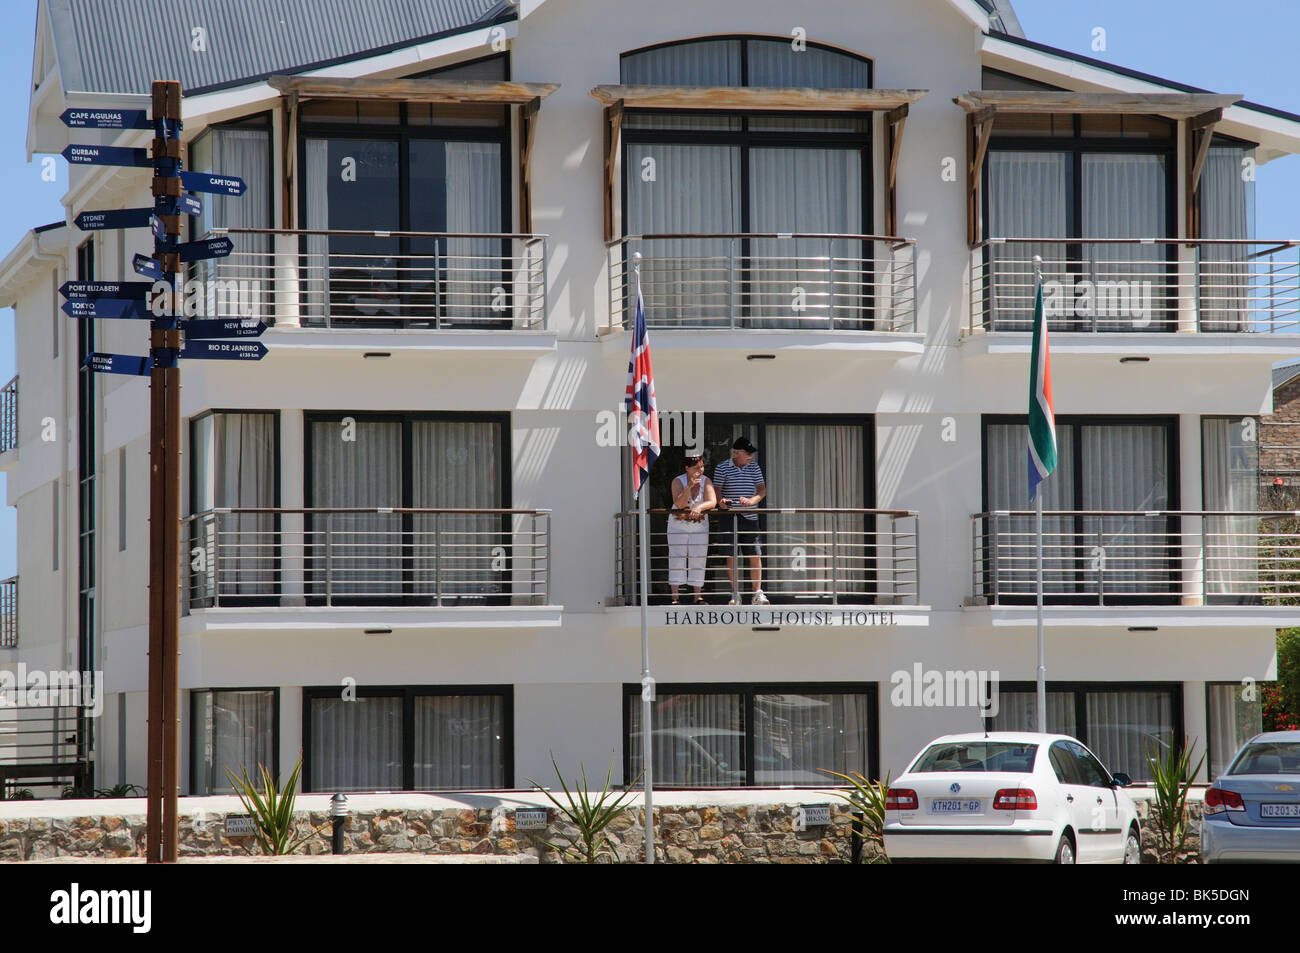 Hotel rooms balconies guests and parking at the Harbour House Hotel in Hermanus a popular seaside resort S Africa Stock Photo